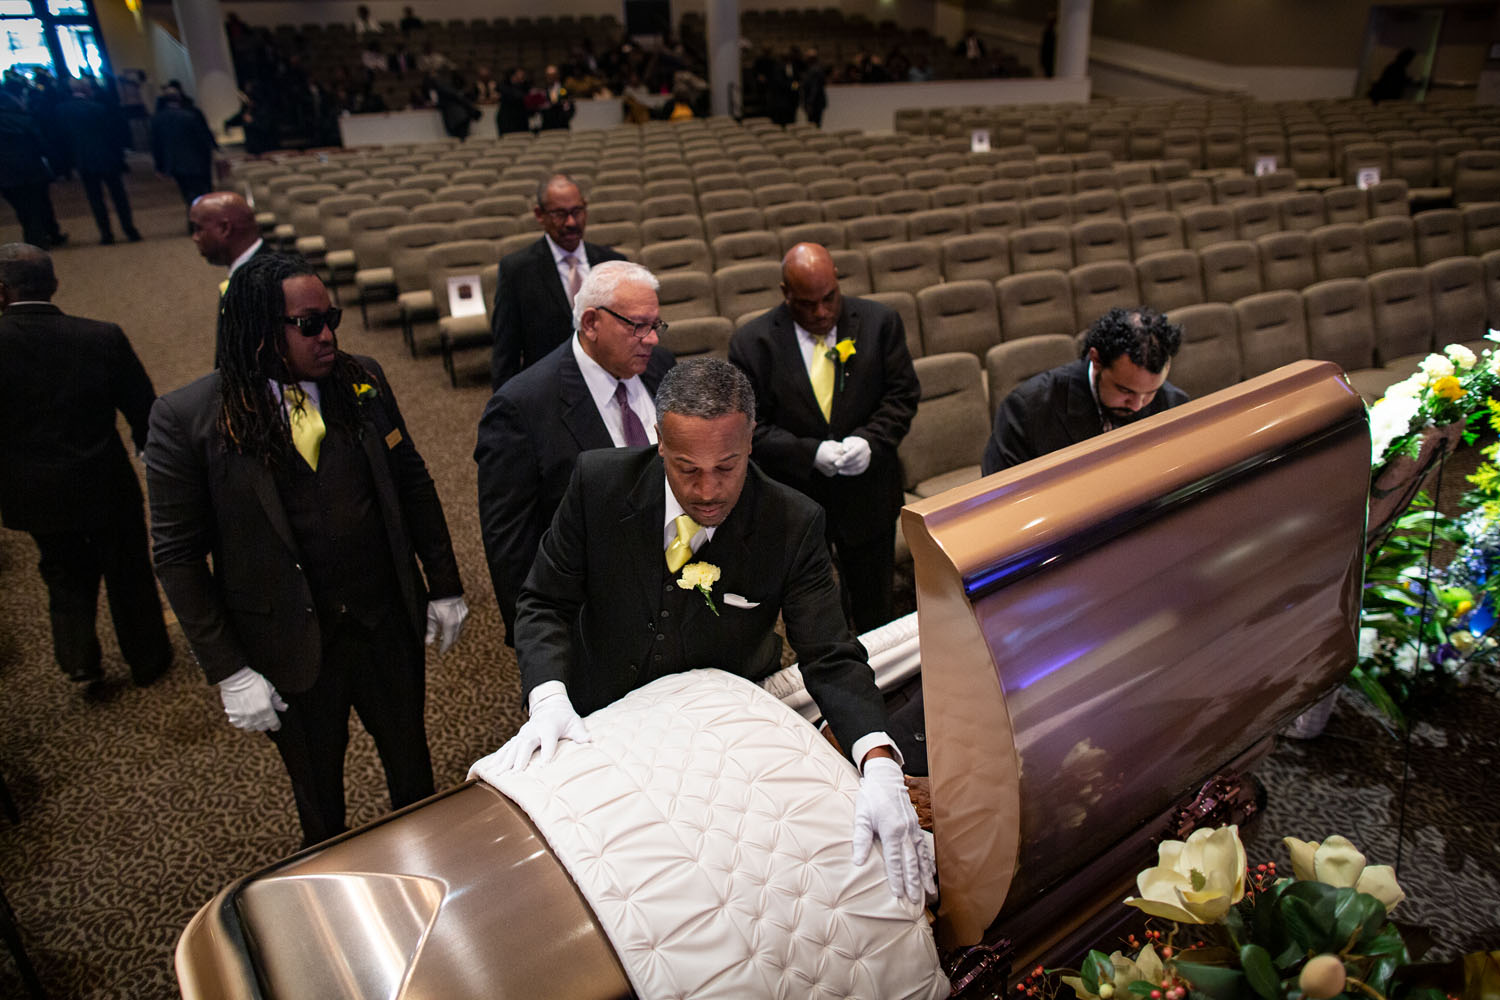 Homegoing for Judge William T. Stone, funeral director of Whiting’s Funeral Home. Williamsburg Community Chapel, Williamsburg, VA, January 2018.